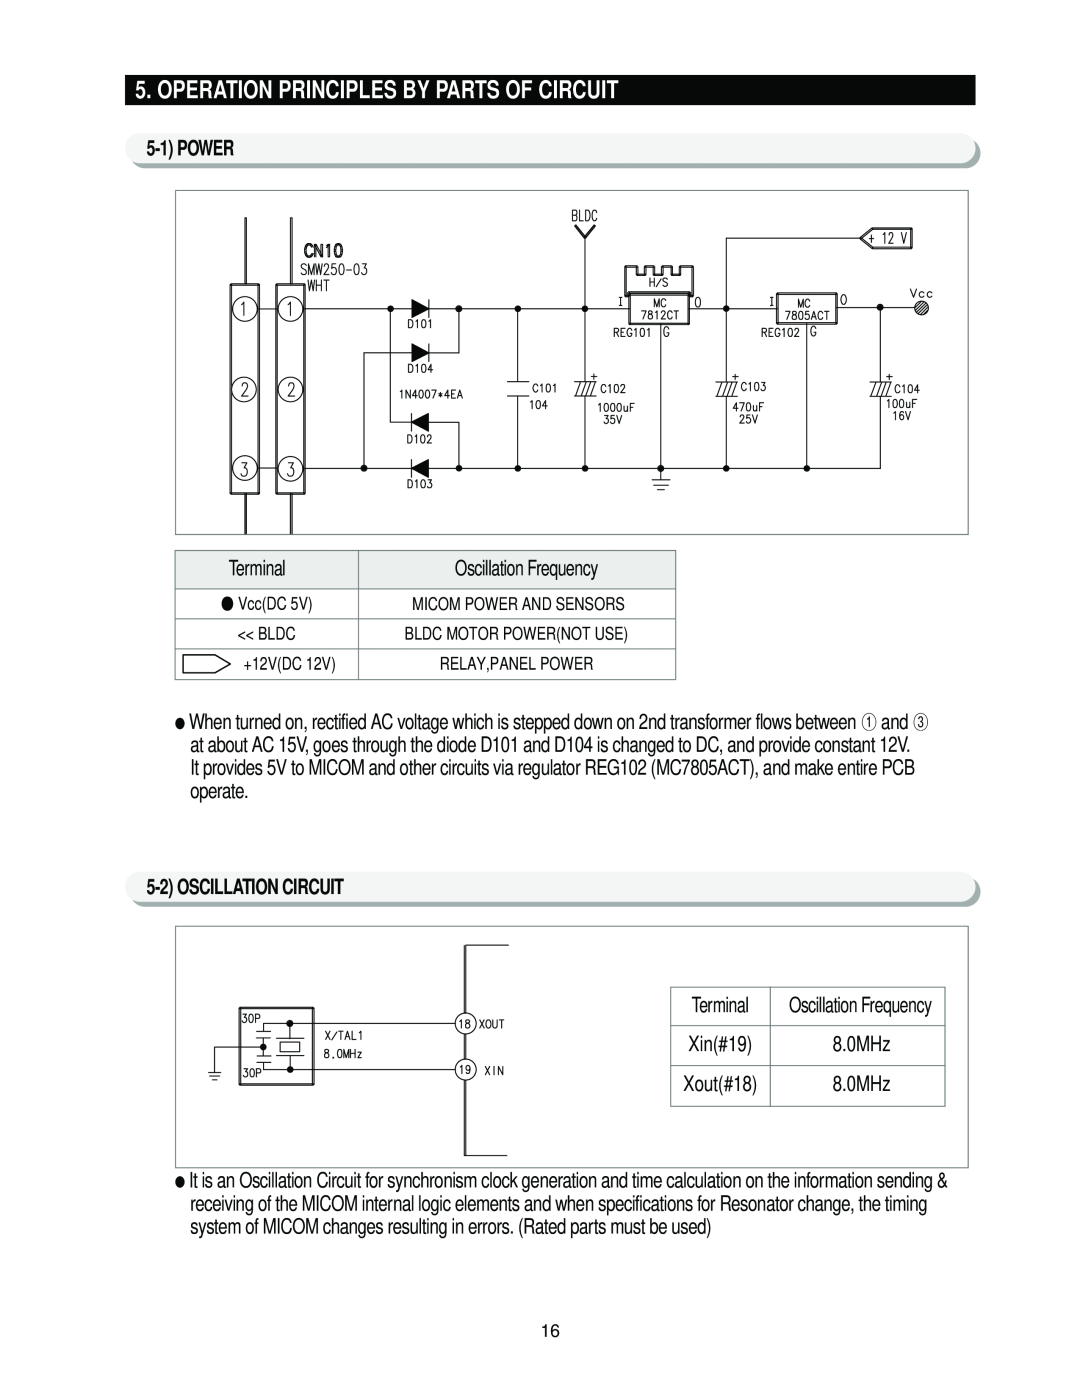 Samsung RS2*3* manual Operation Principles By Parts Of Circuit, 5-1POWER, 5-2OSCILLATION CIRCUIT 